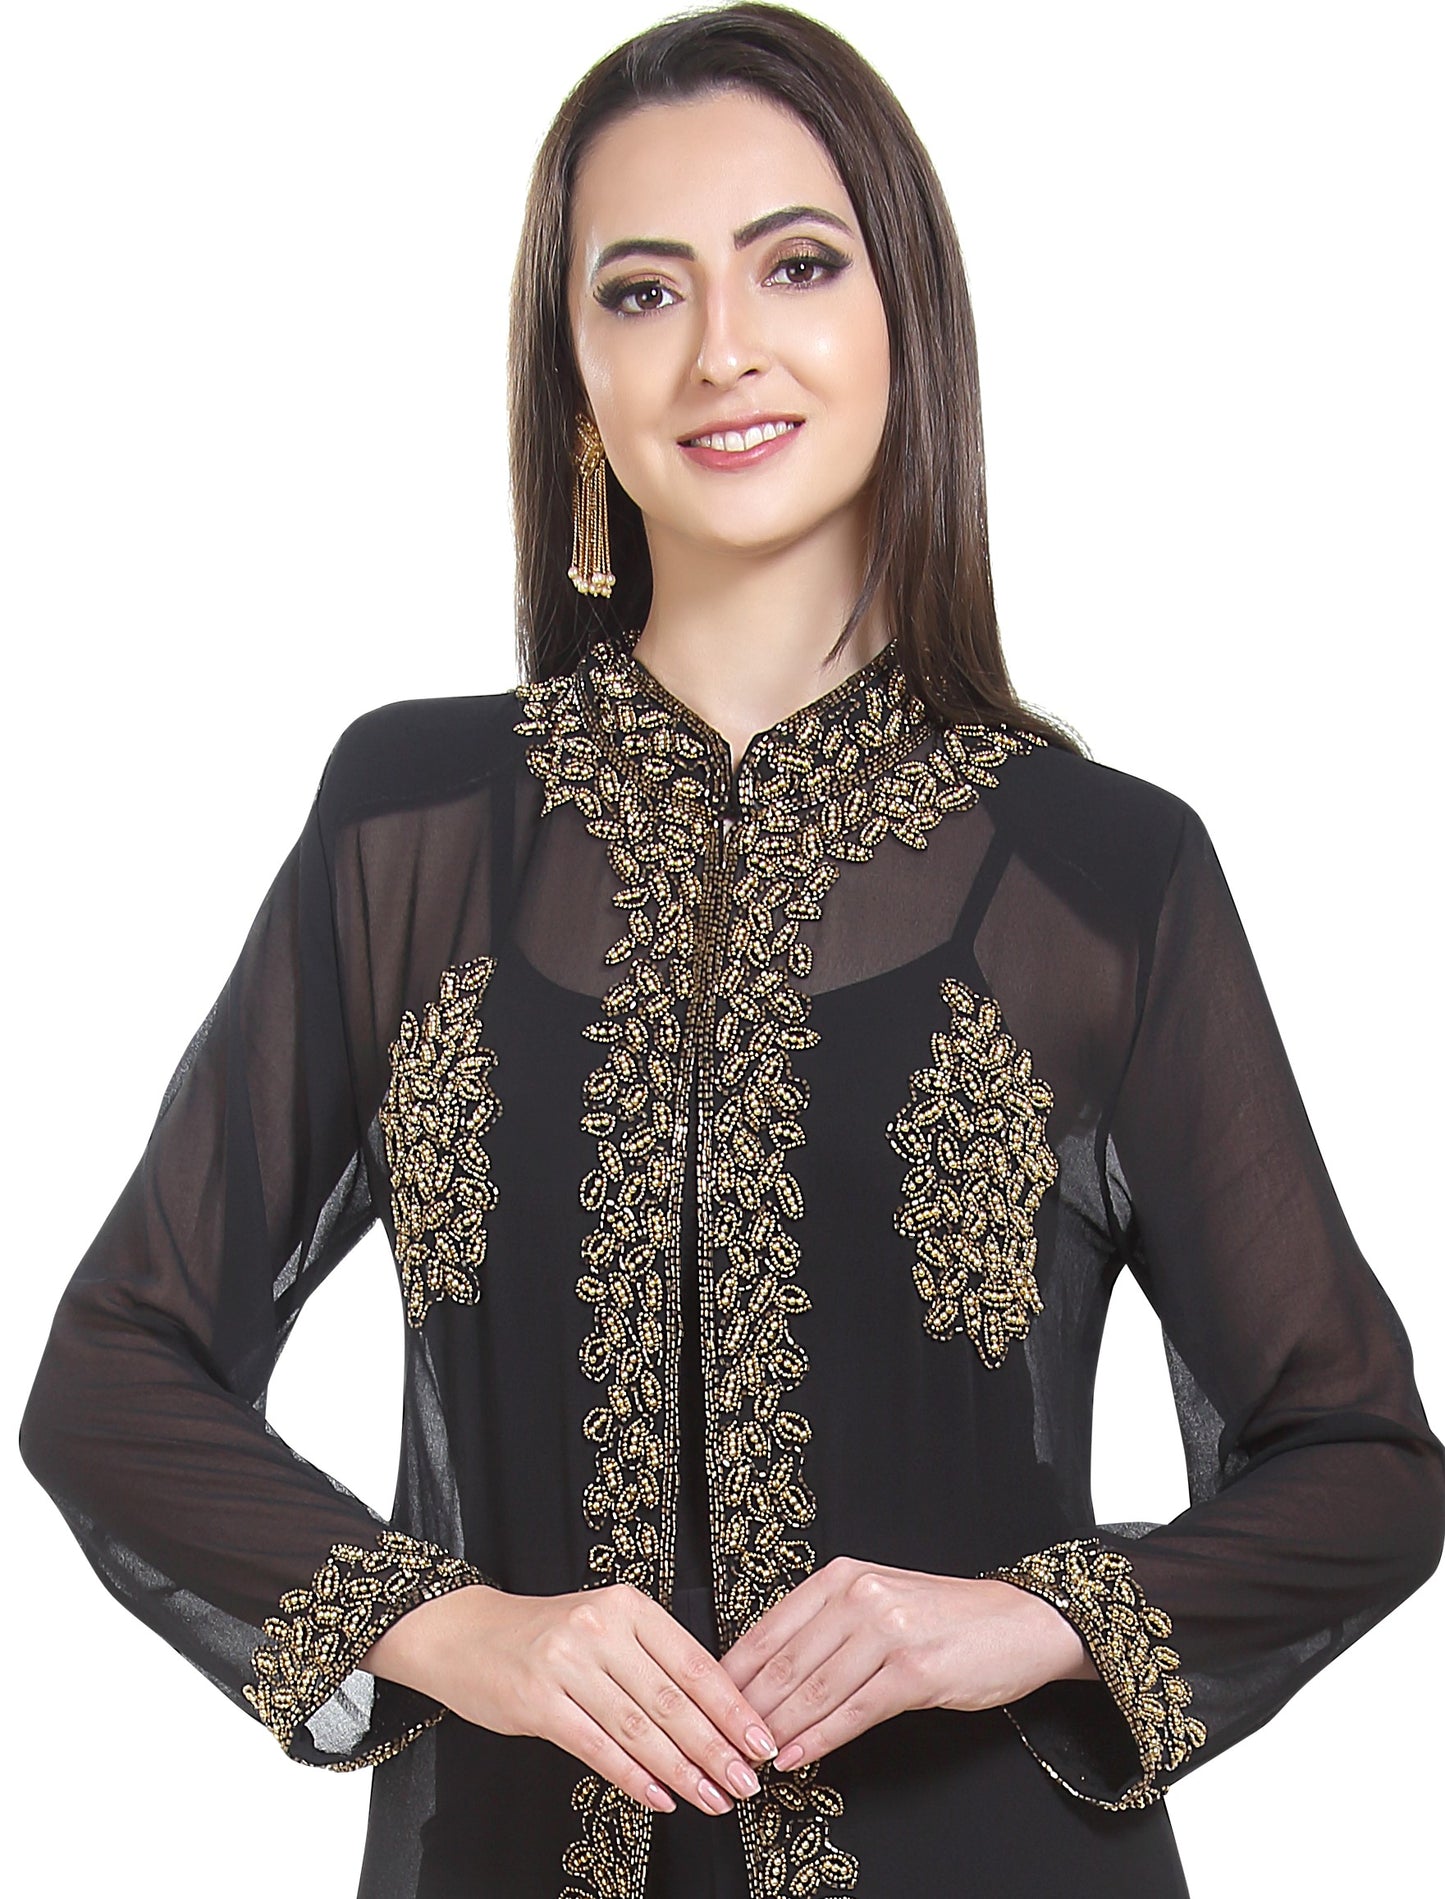 Load image into Gallery viewer, Embroidered Kurti in Black Overcoat Party Gown - Maxim Creation
